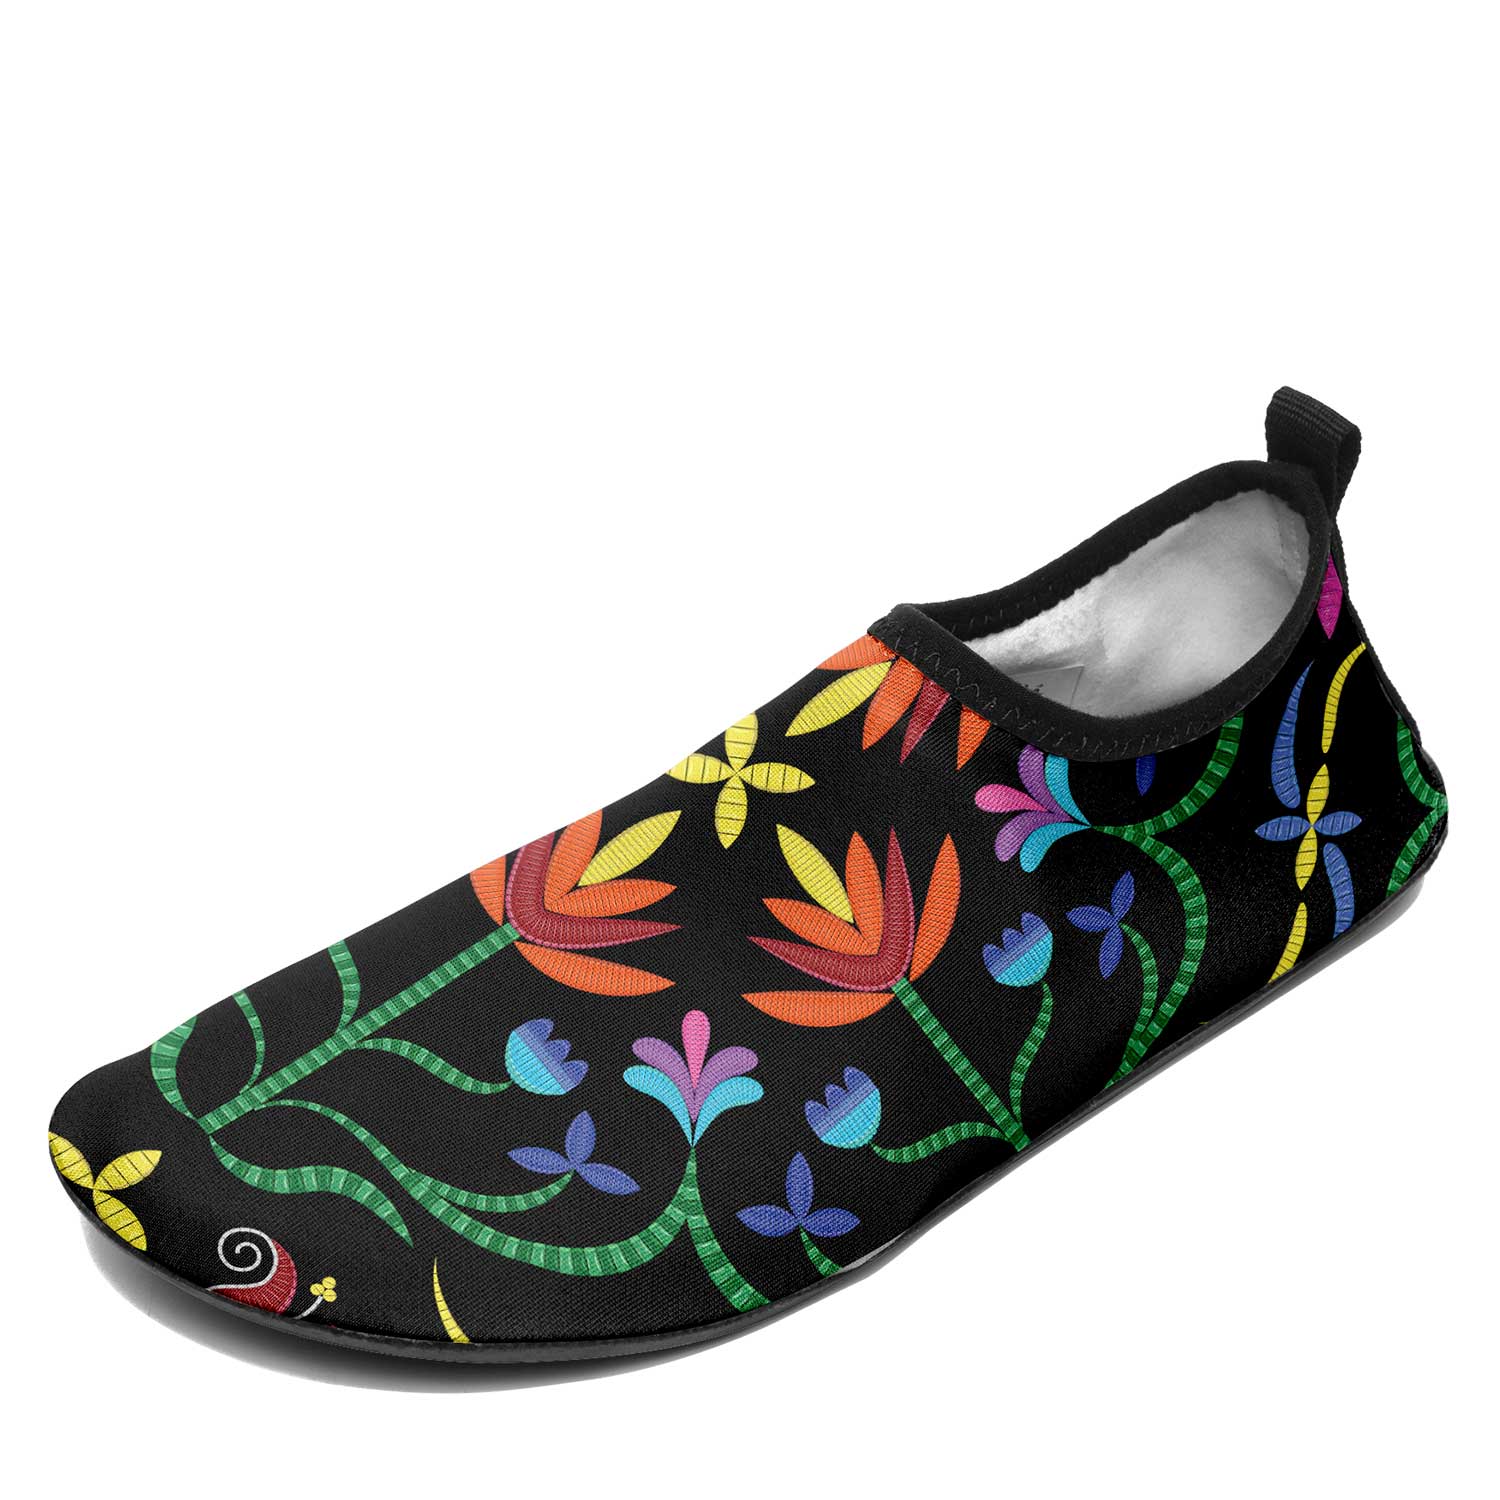 Quill Visions Kid's Sockamoccs Slip On Shoes